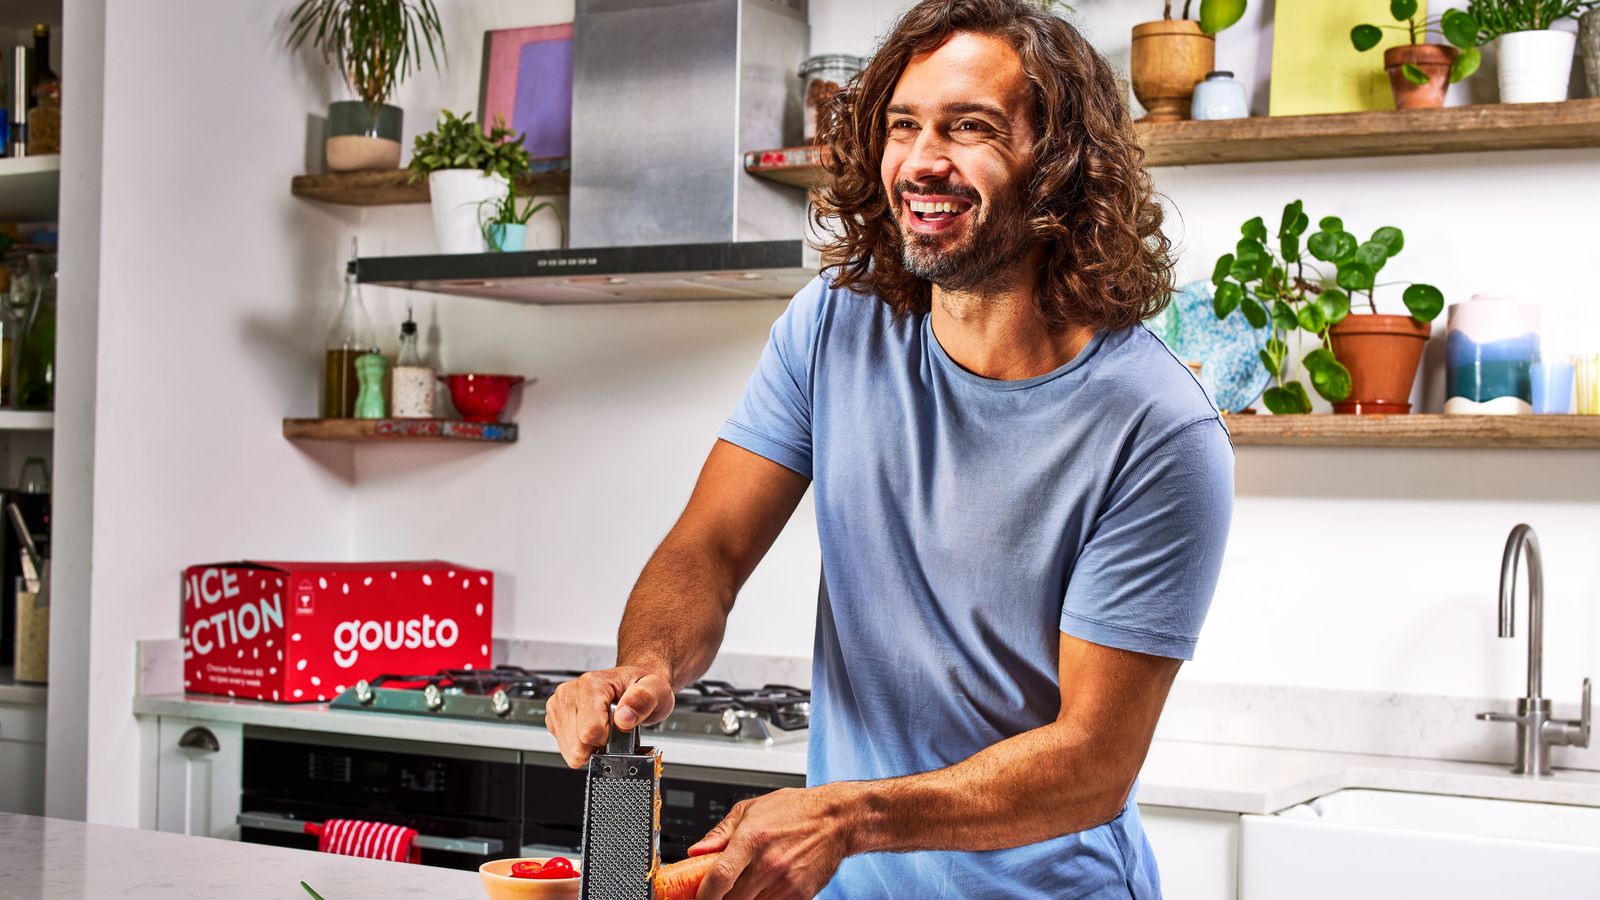 Meal-kit delivery unicorn Gousto cuts valuation in latest funding